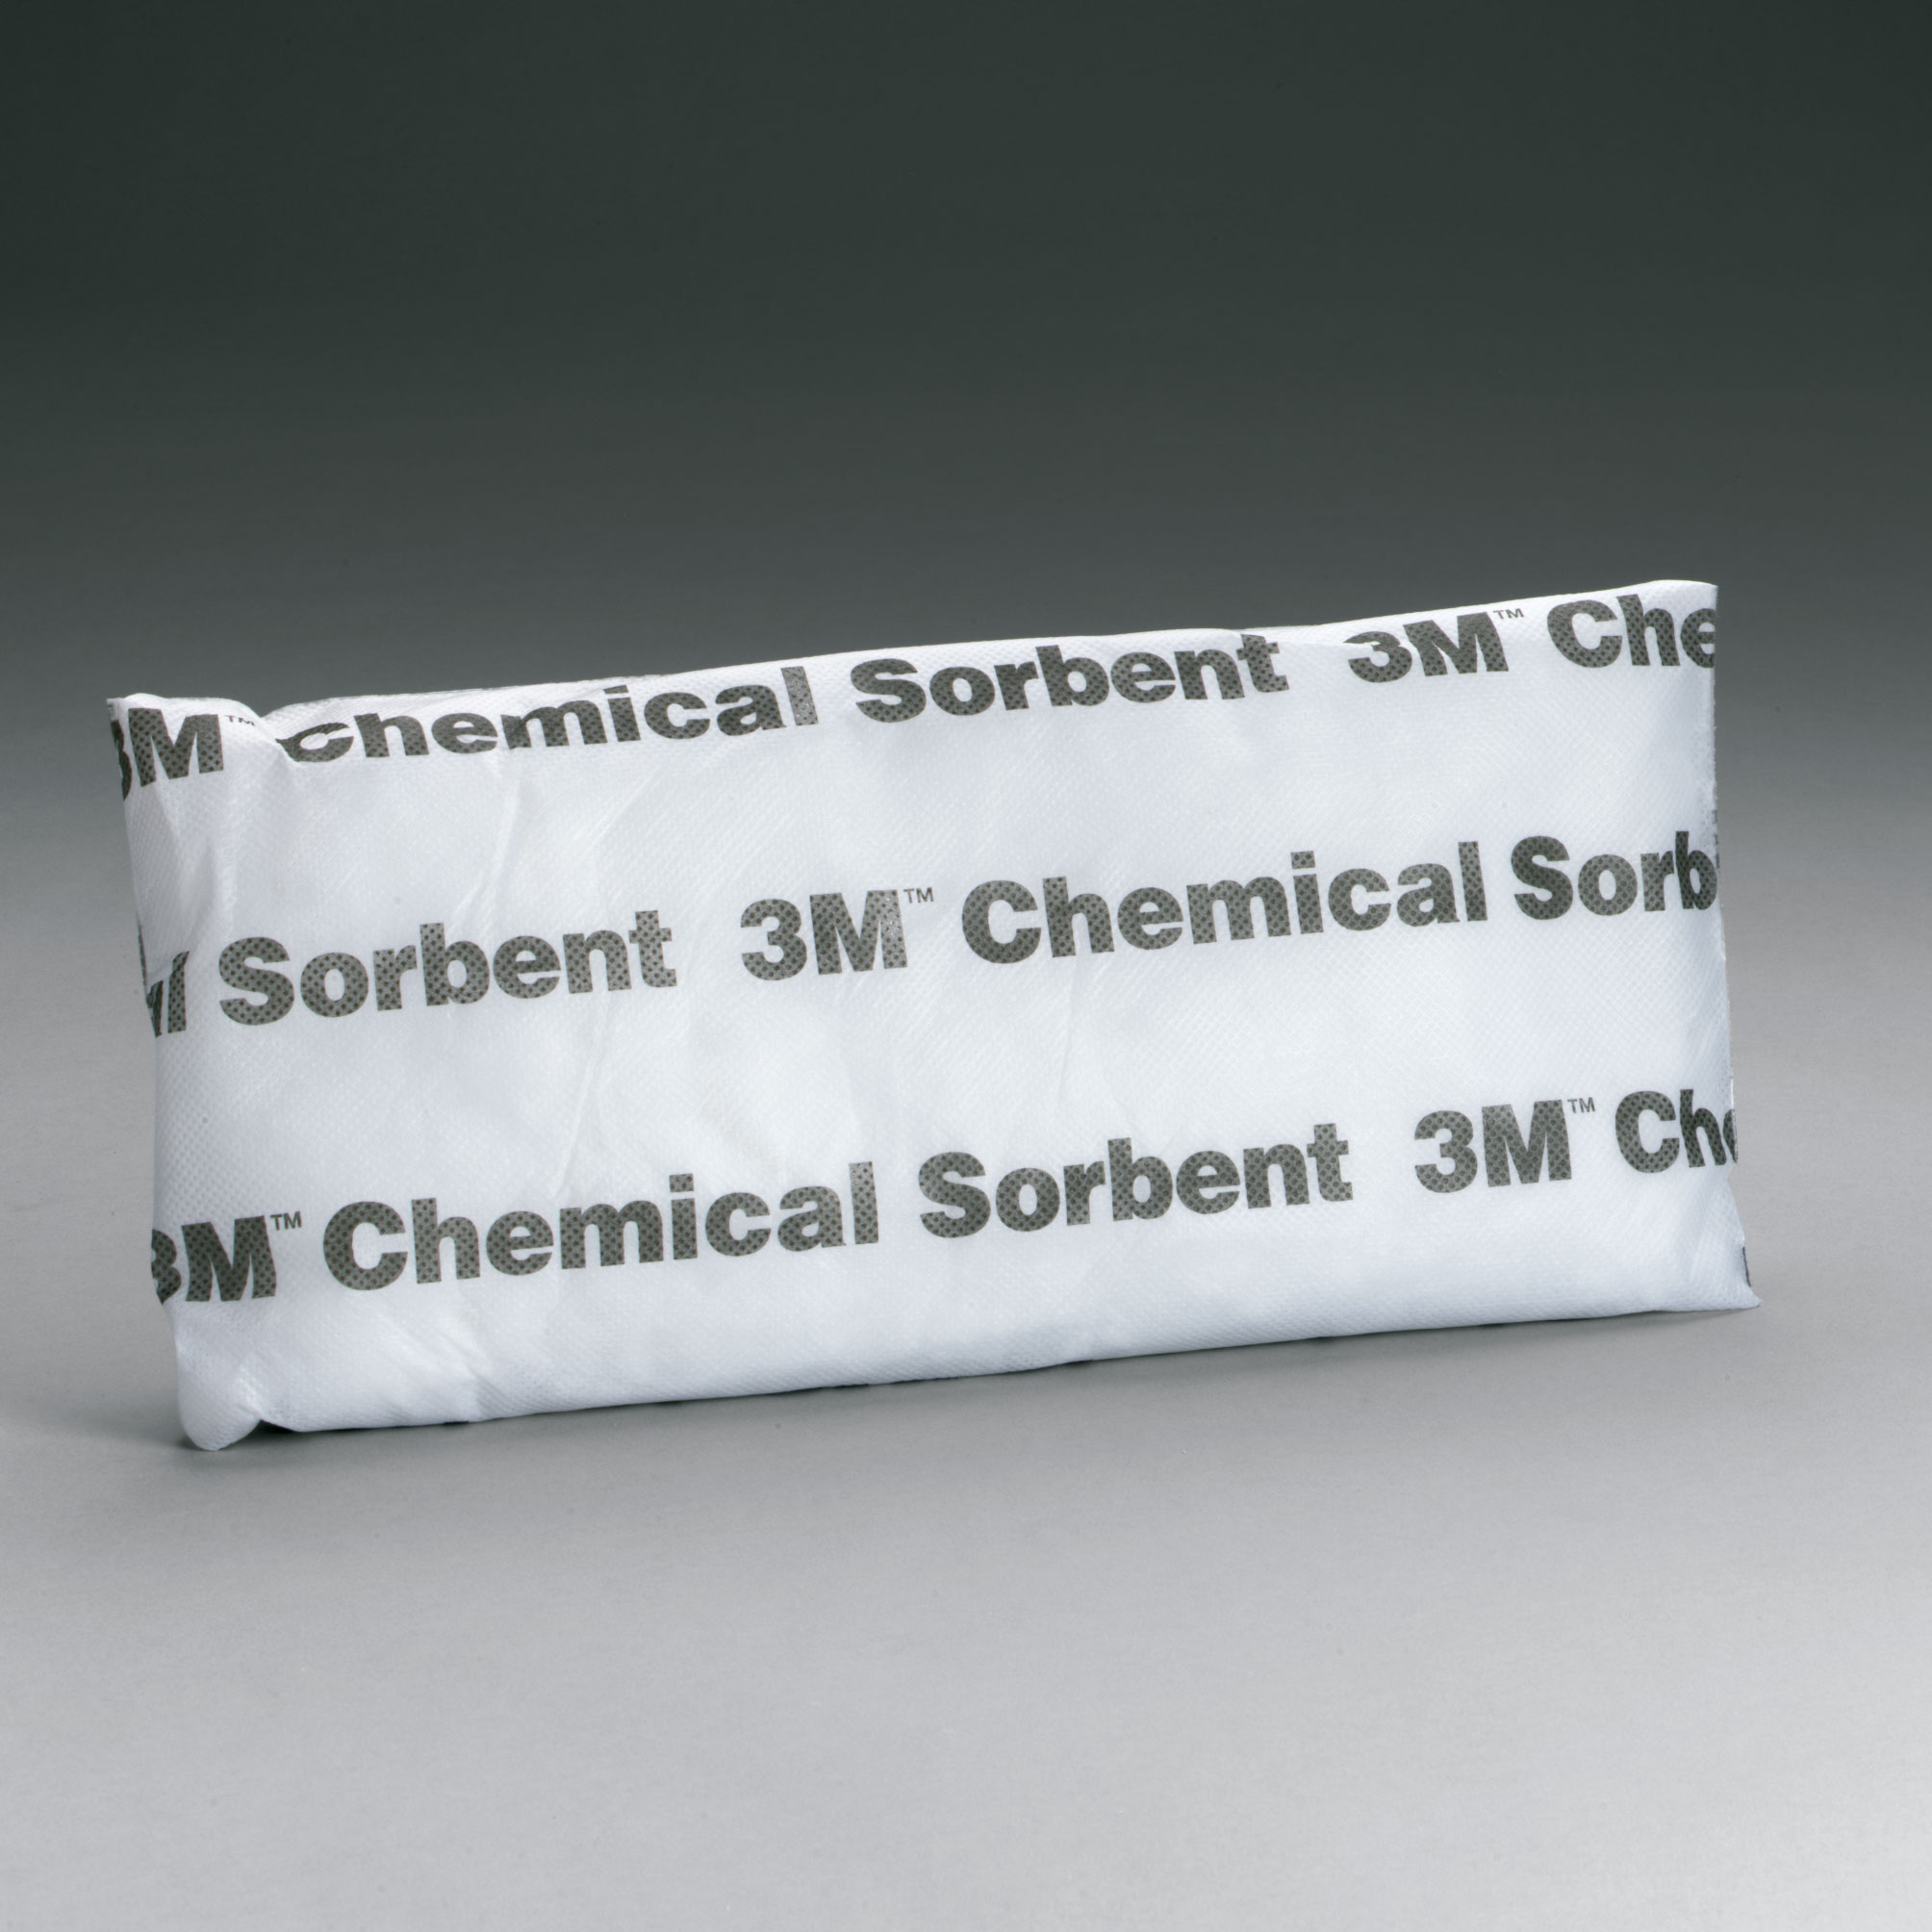 Absorbent for oils, lubricants, hydraulic liquids and industrial fluids. Series P chemicals. Model: P300 Absorbent pads. Dimensions: 18x38cm. Pack absorption: 32L